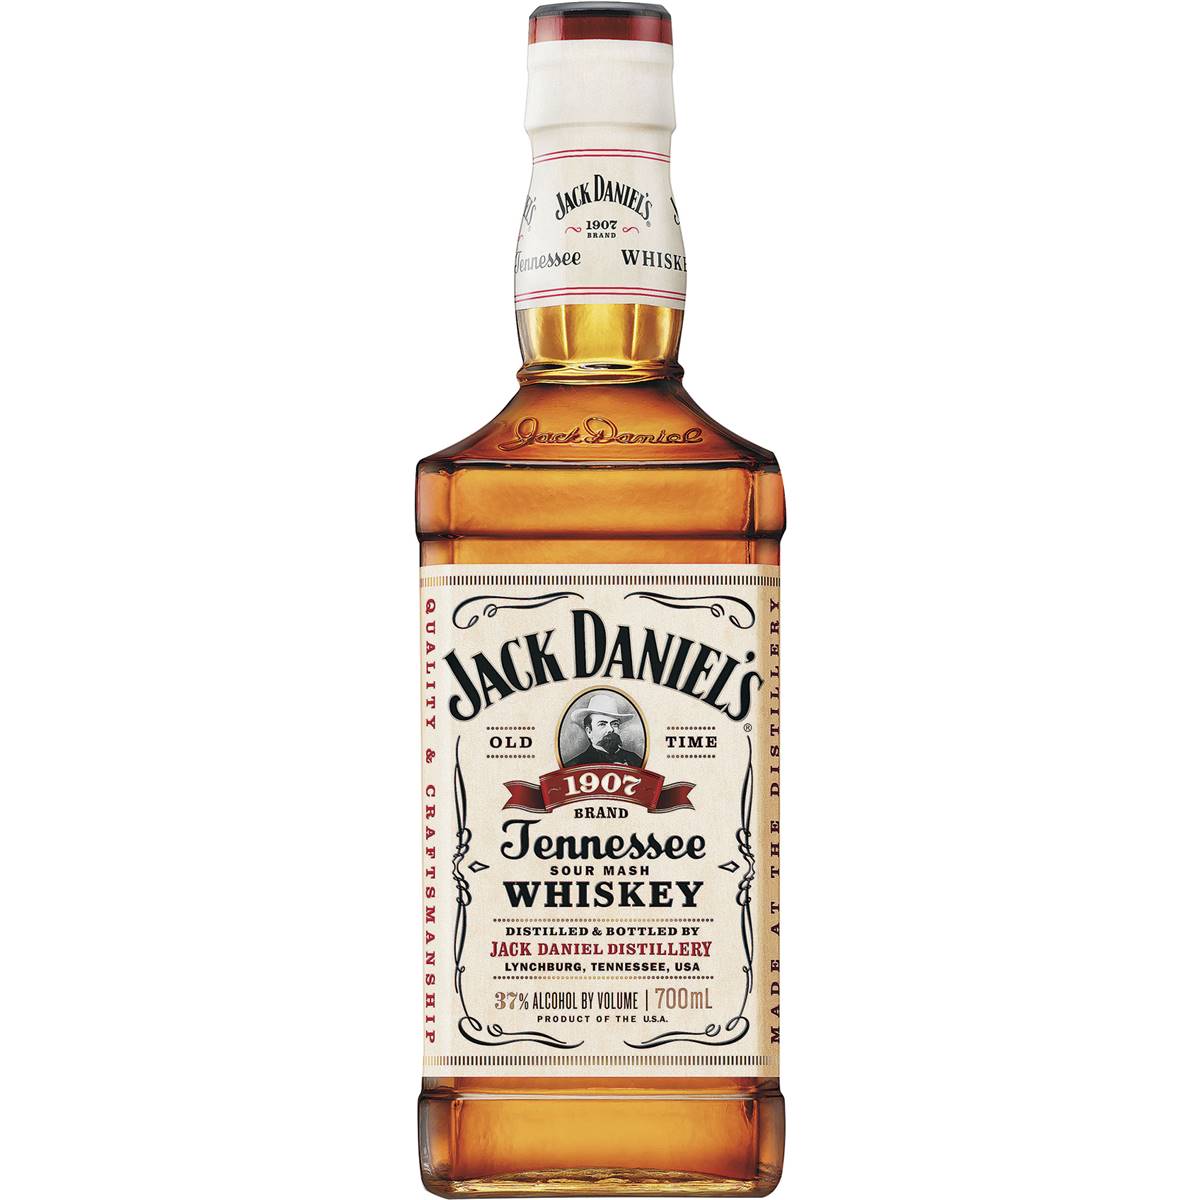 Image - 1907 Tennessee Whiskey by Jack Daniels